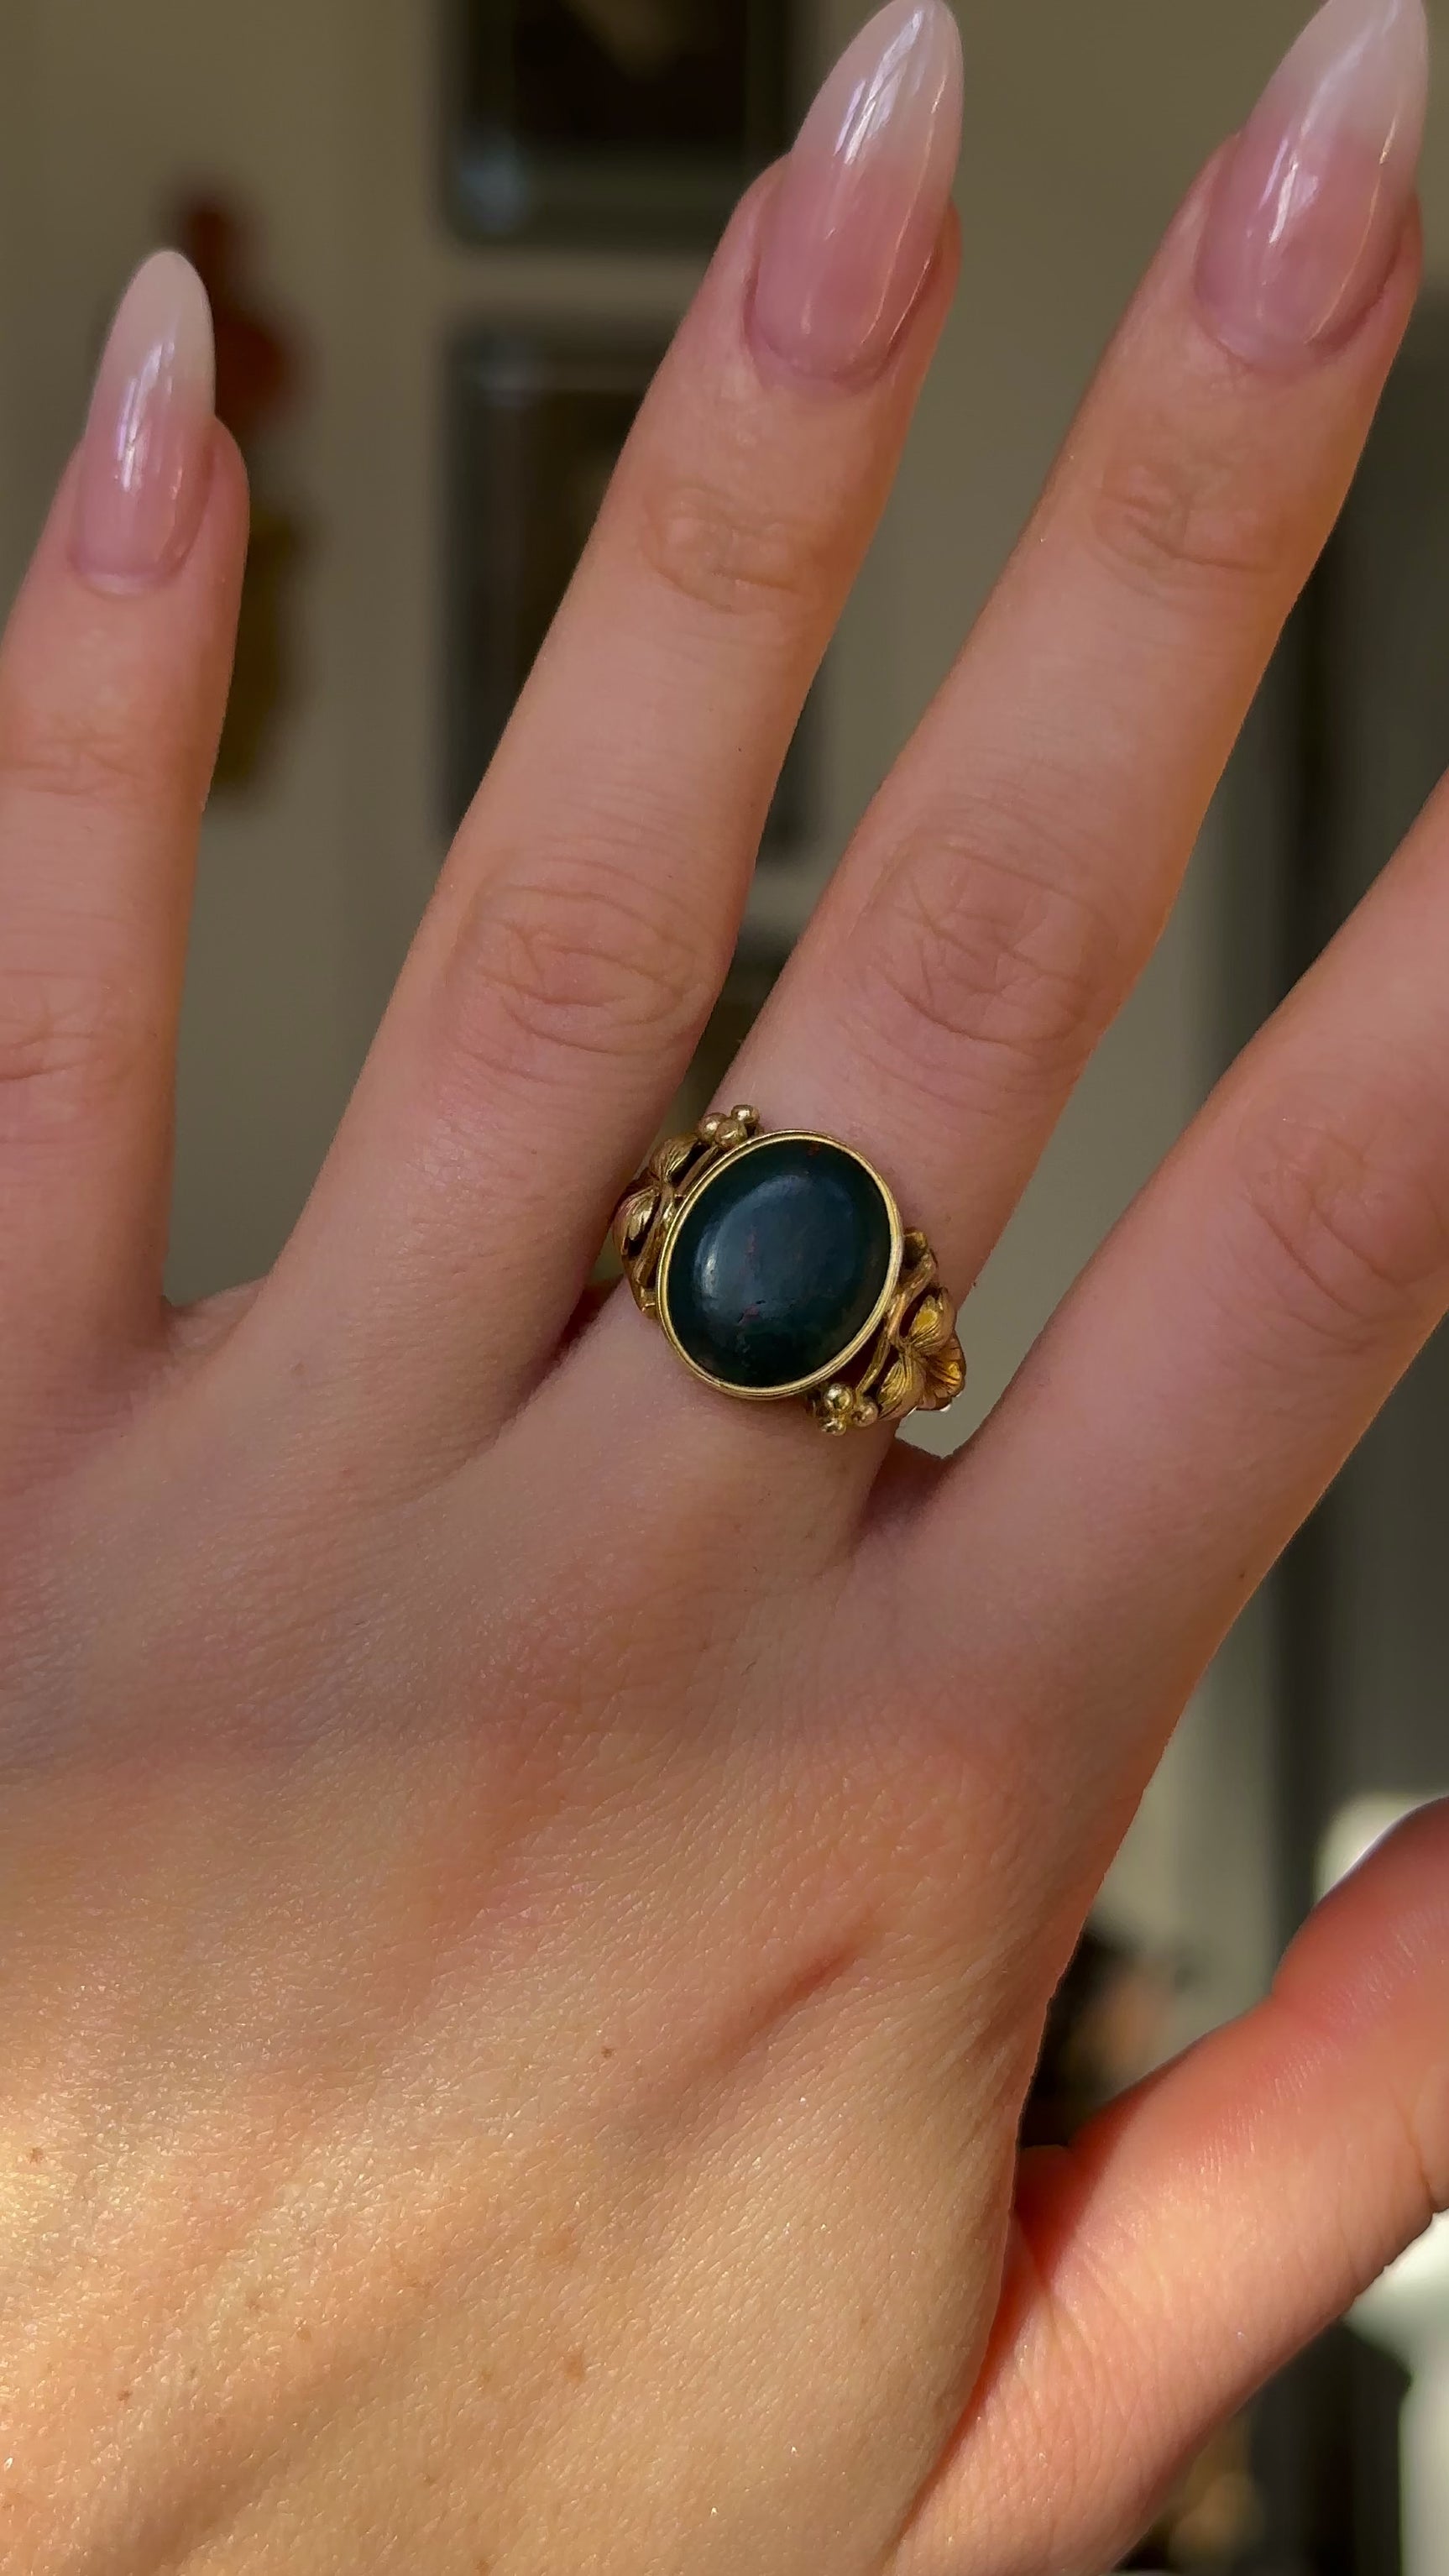 Antique, Victorian Bloodstone Signet Ring, 18ct Yellow Gold worn on hand and rotated to give perspective.